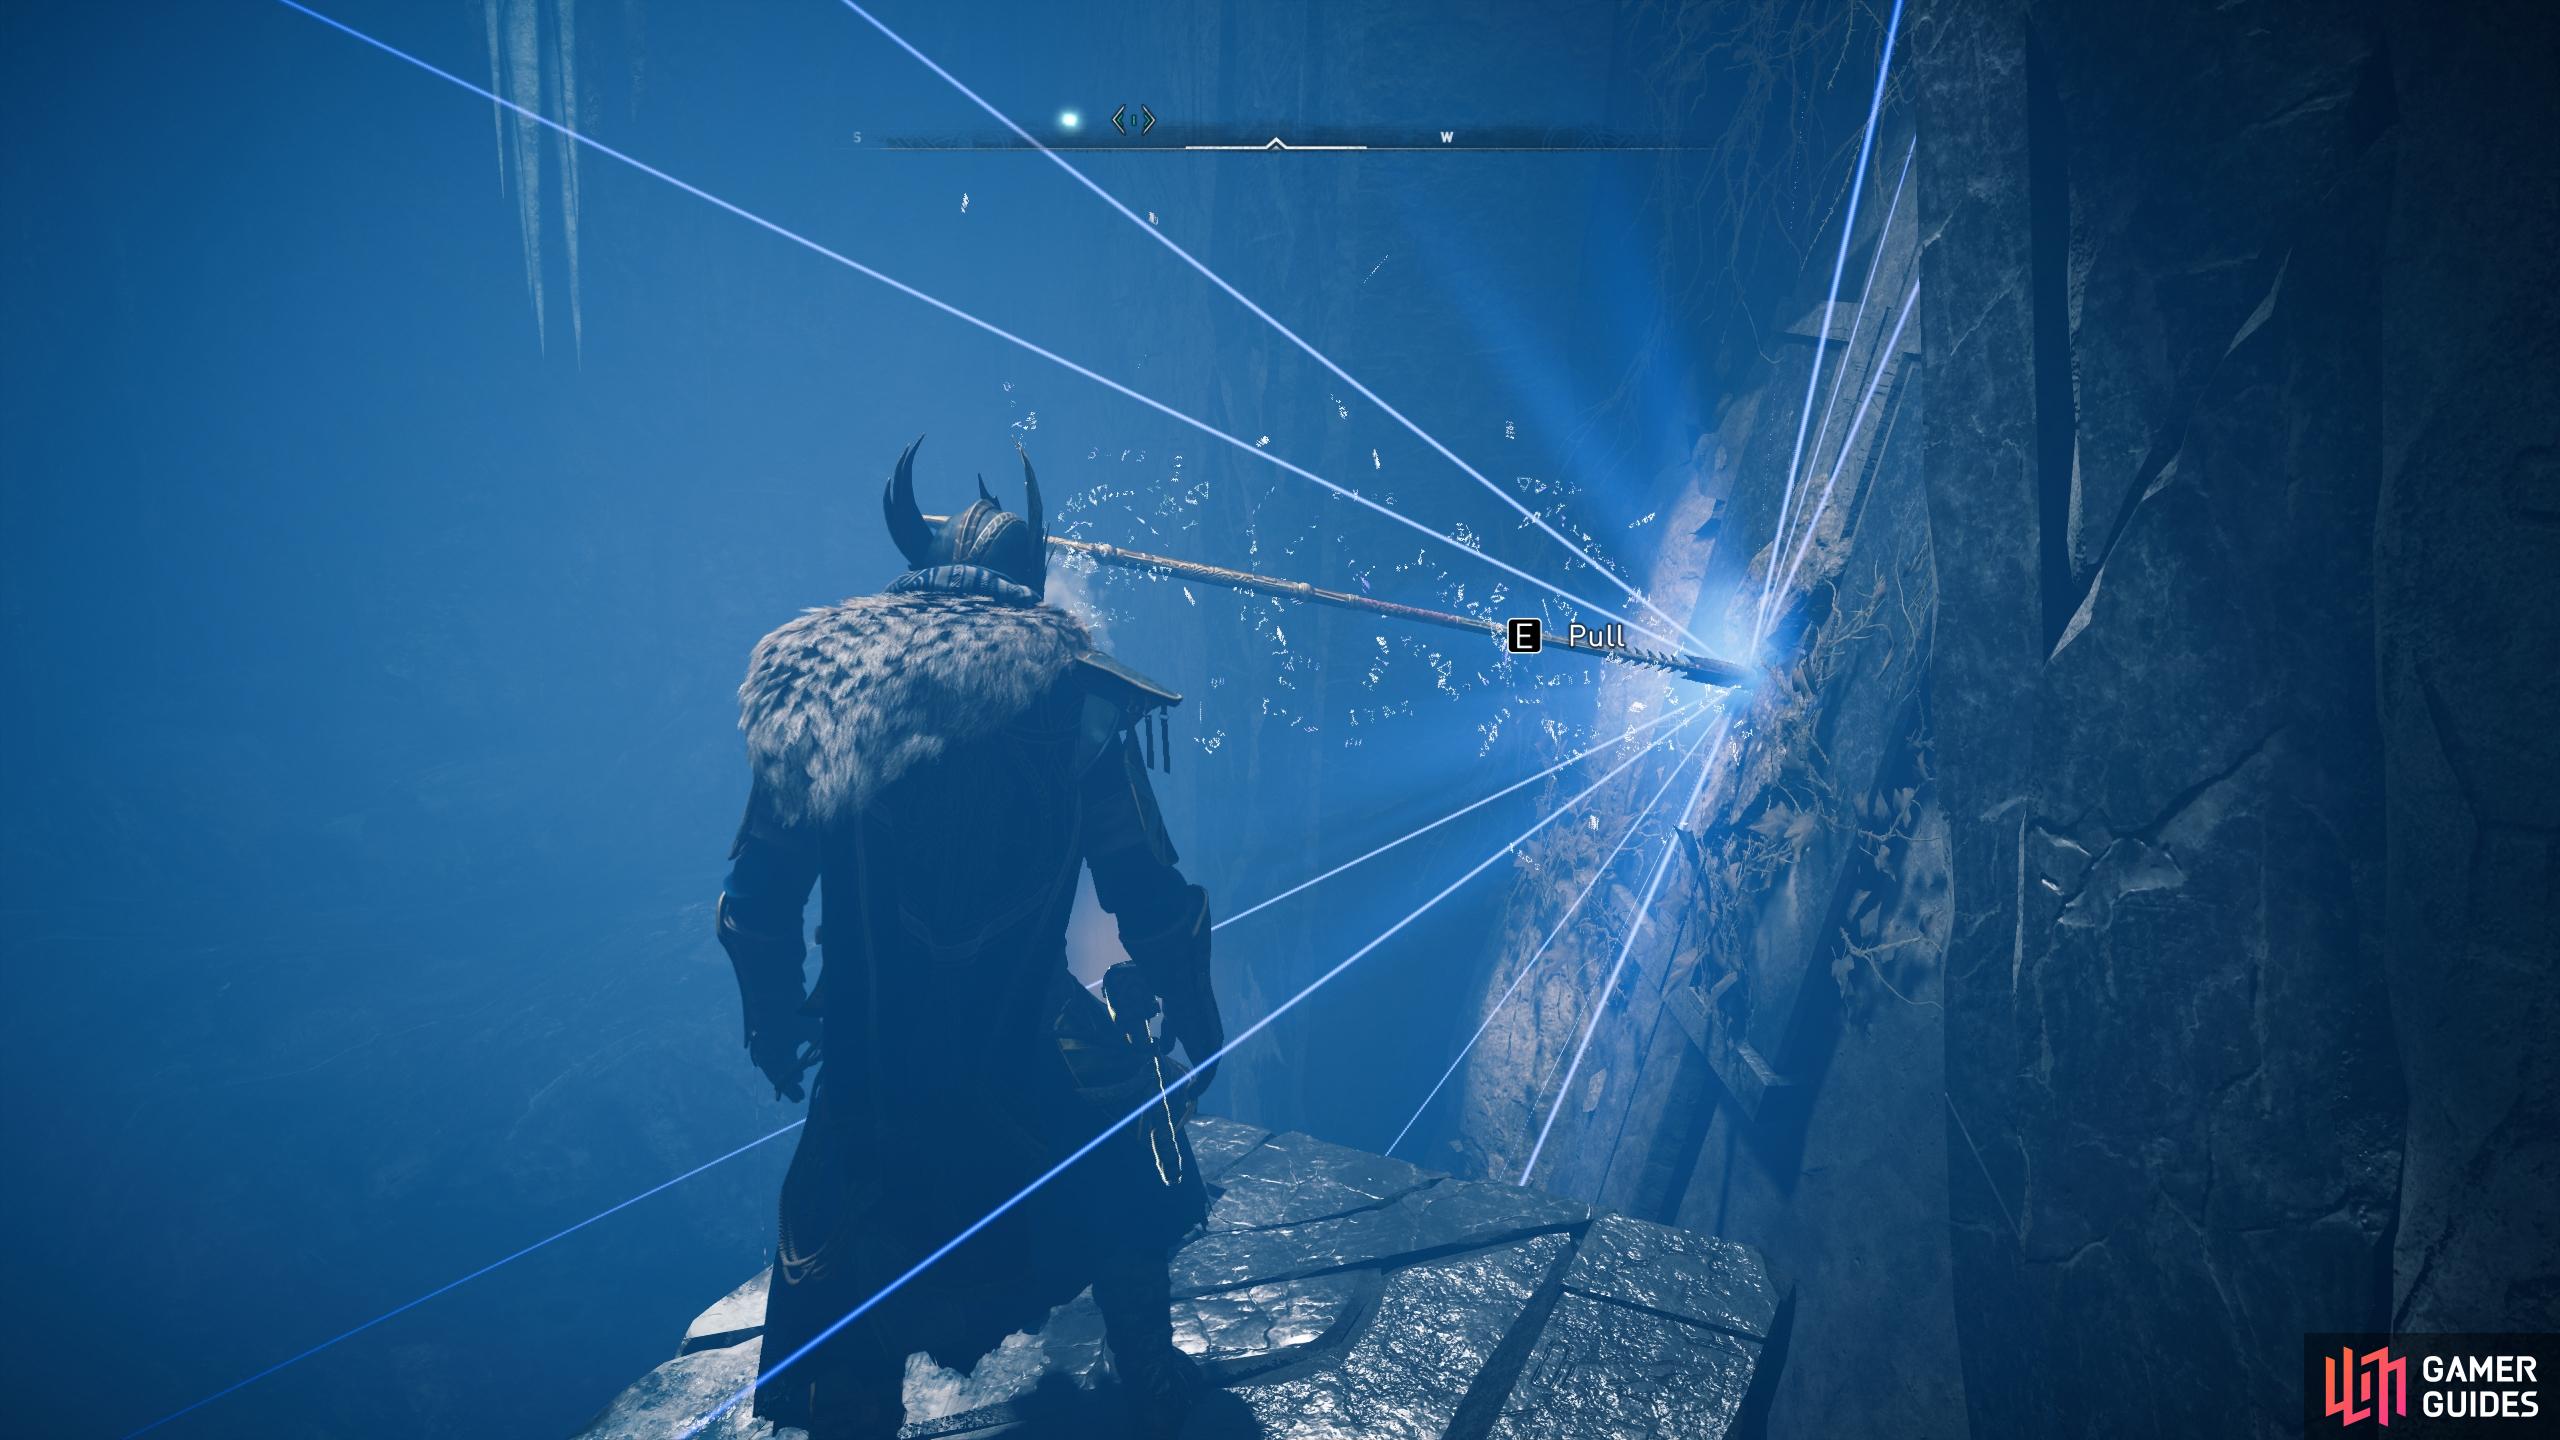 Once you find the spear, all you need to do is interact with it to pull it from the wall.